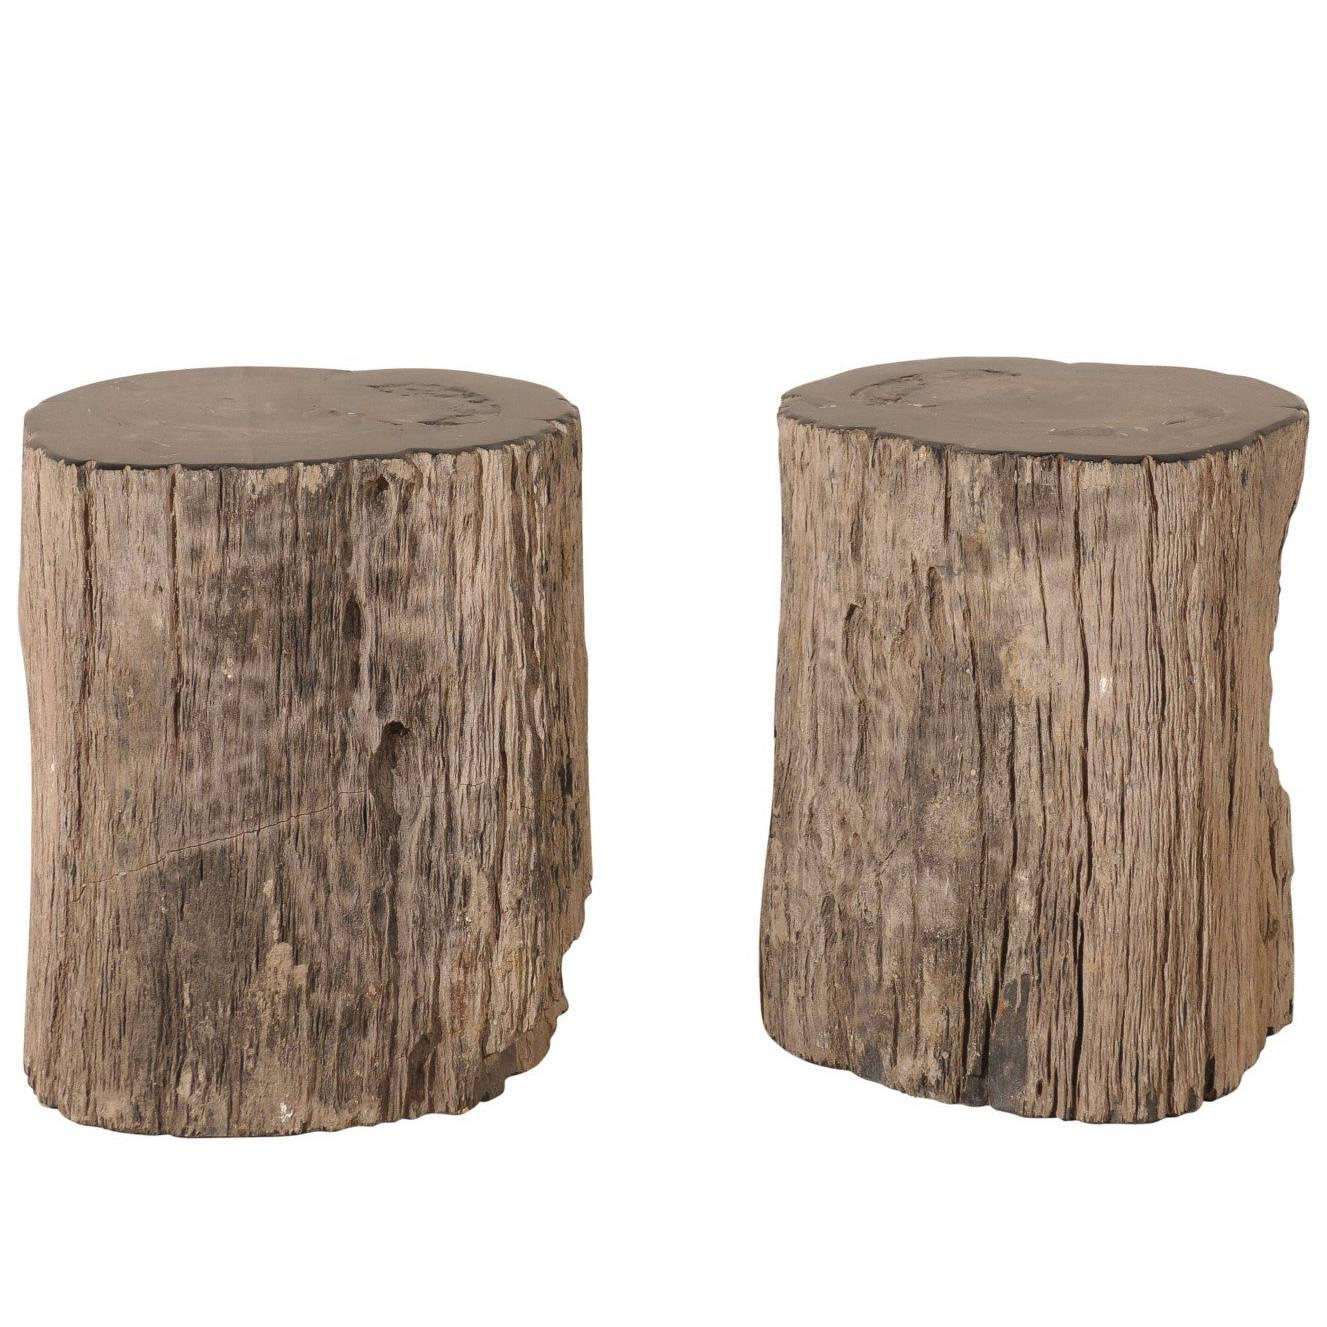 Pair of Black Petrified Wood Fossil Drink or Side Tables, Natural, Polished Wood